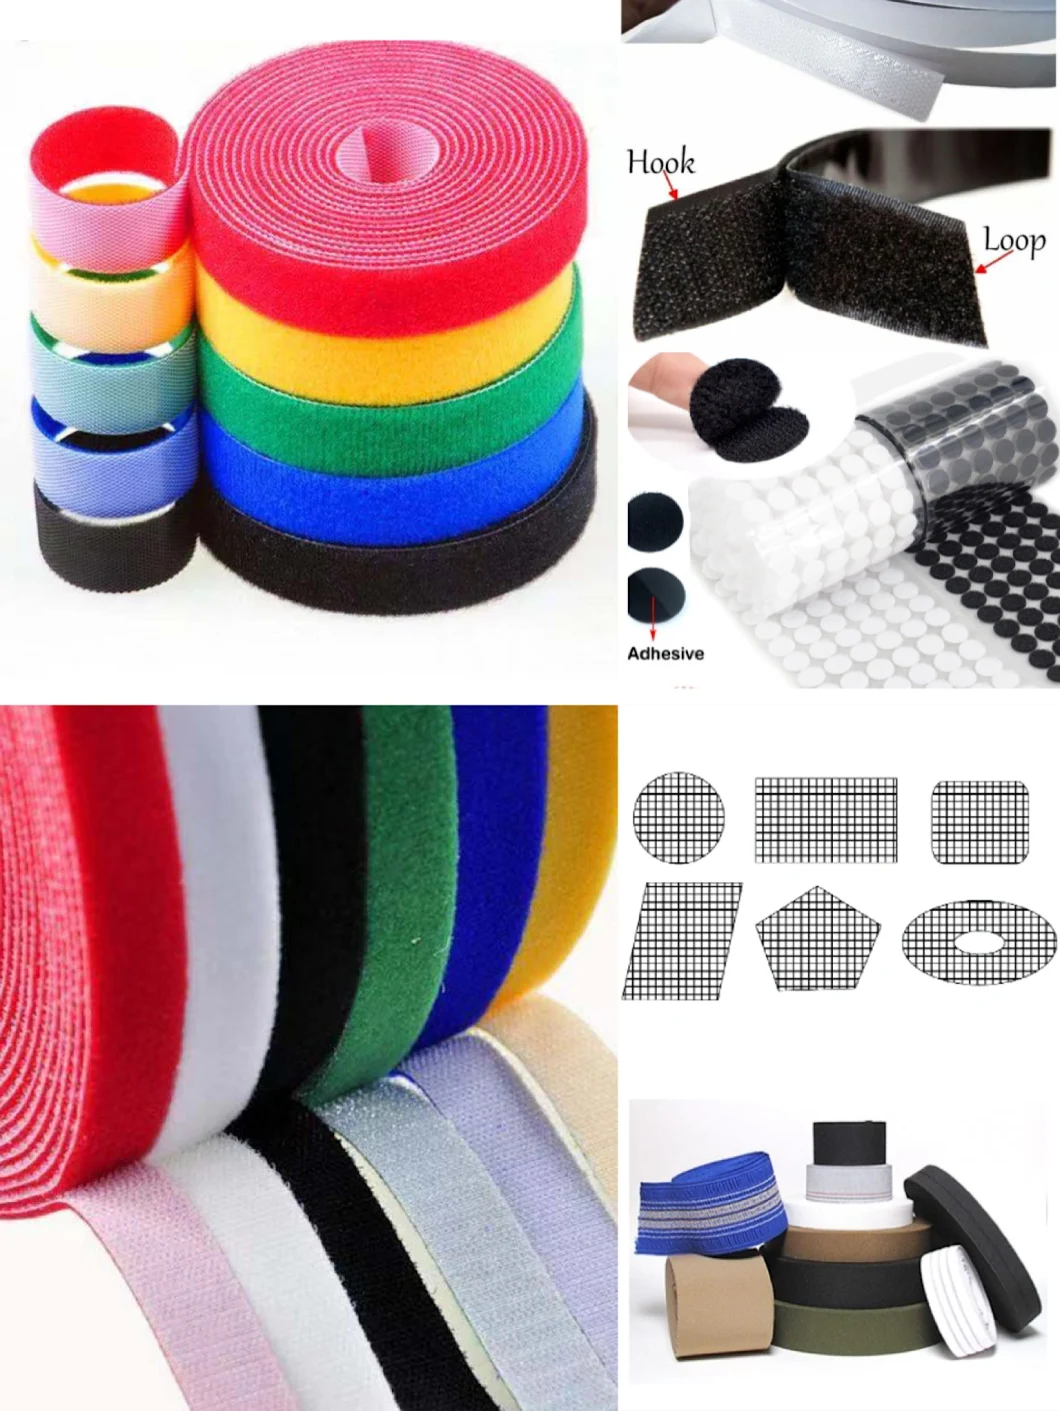 Hot Sale! ! ! Sticky Wall Tape Velcro Wall Hook Loop Double Sided Adhesive Strong Hold